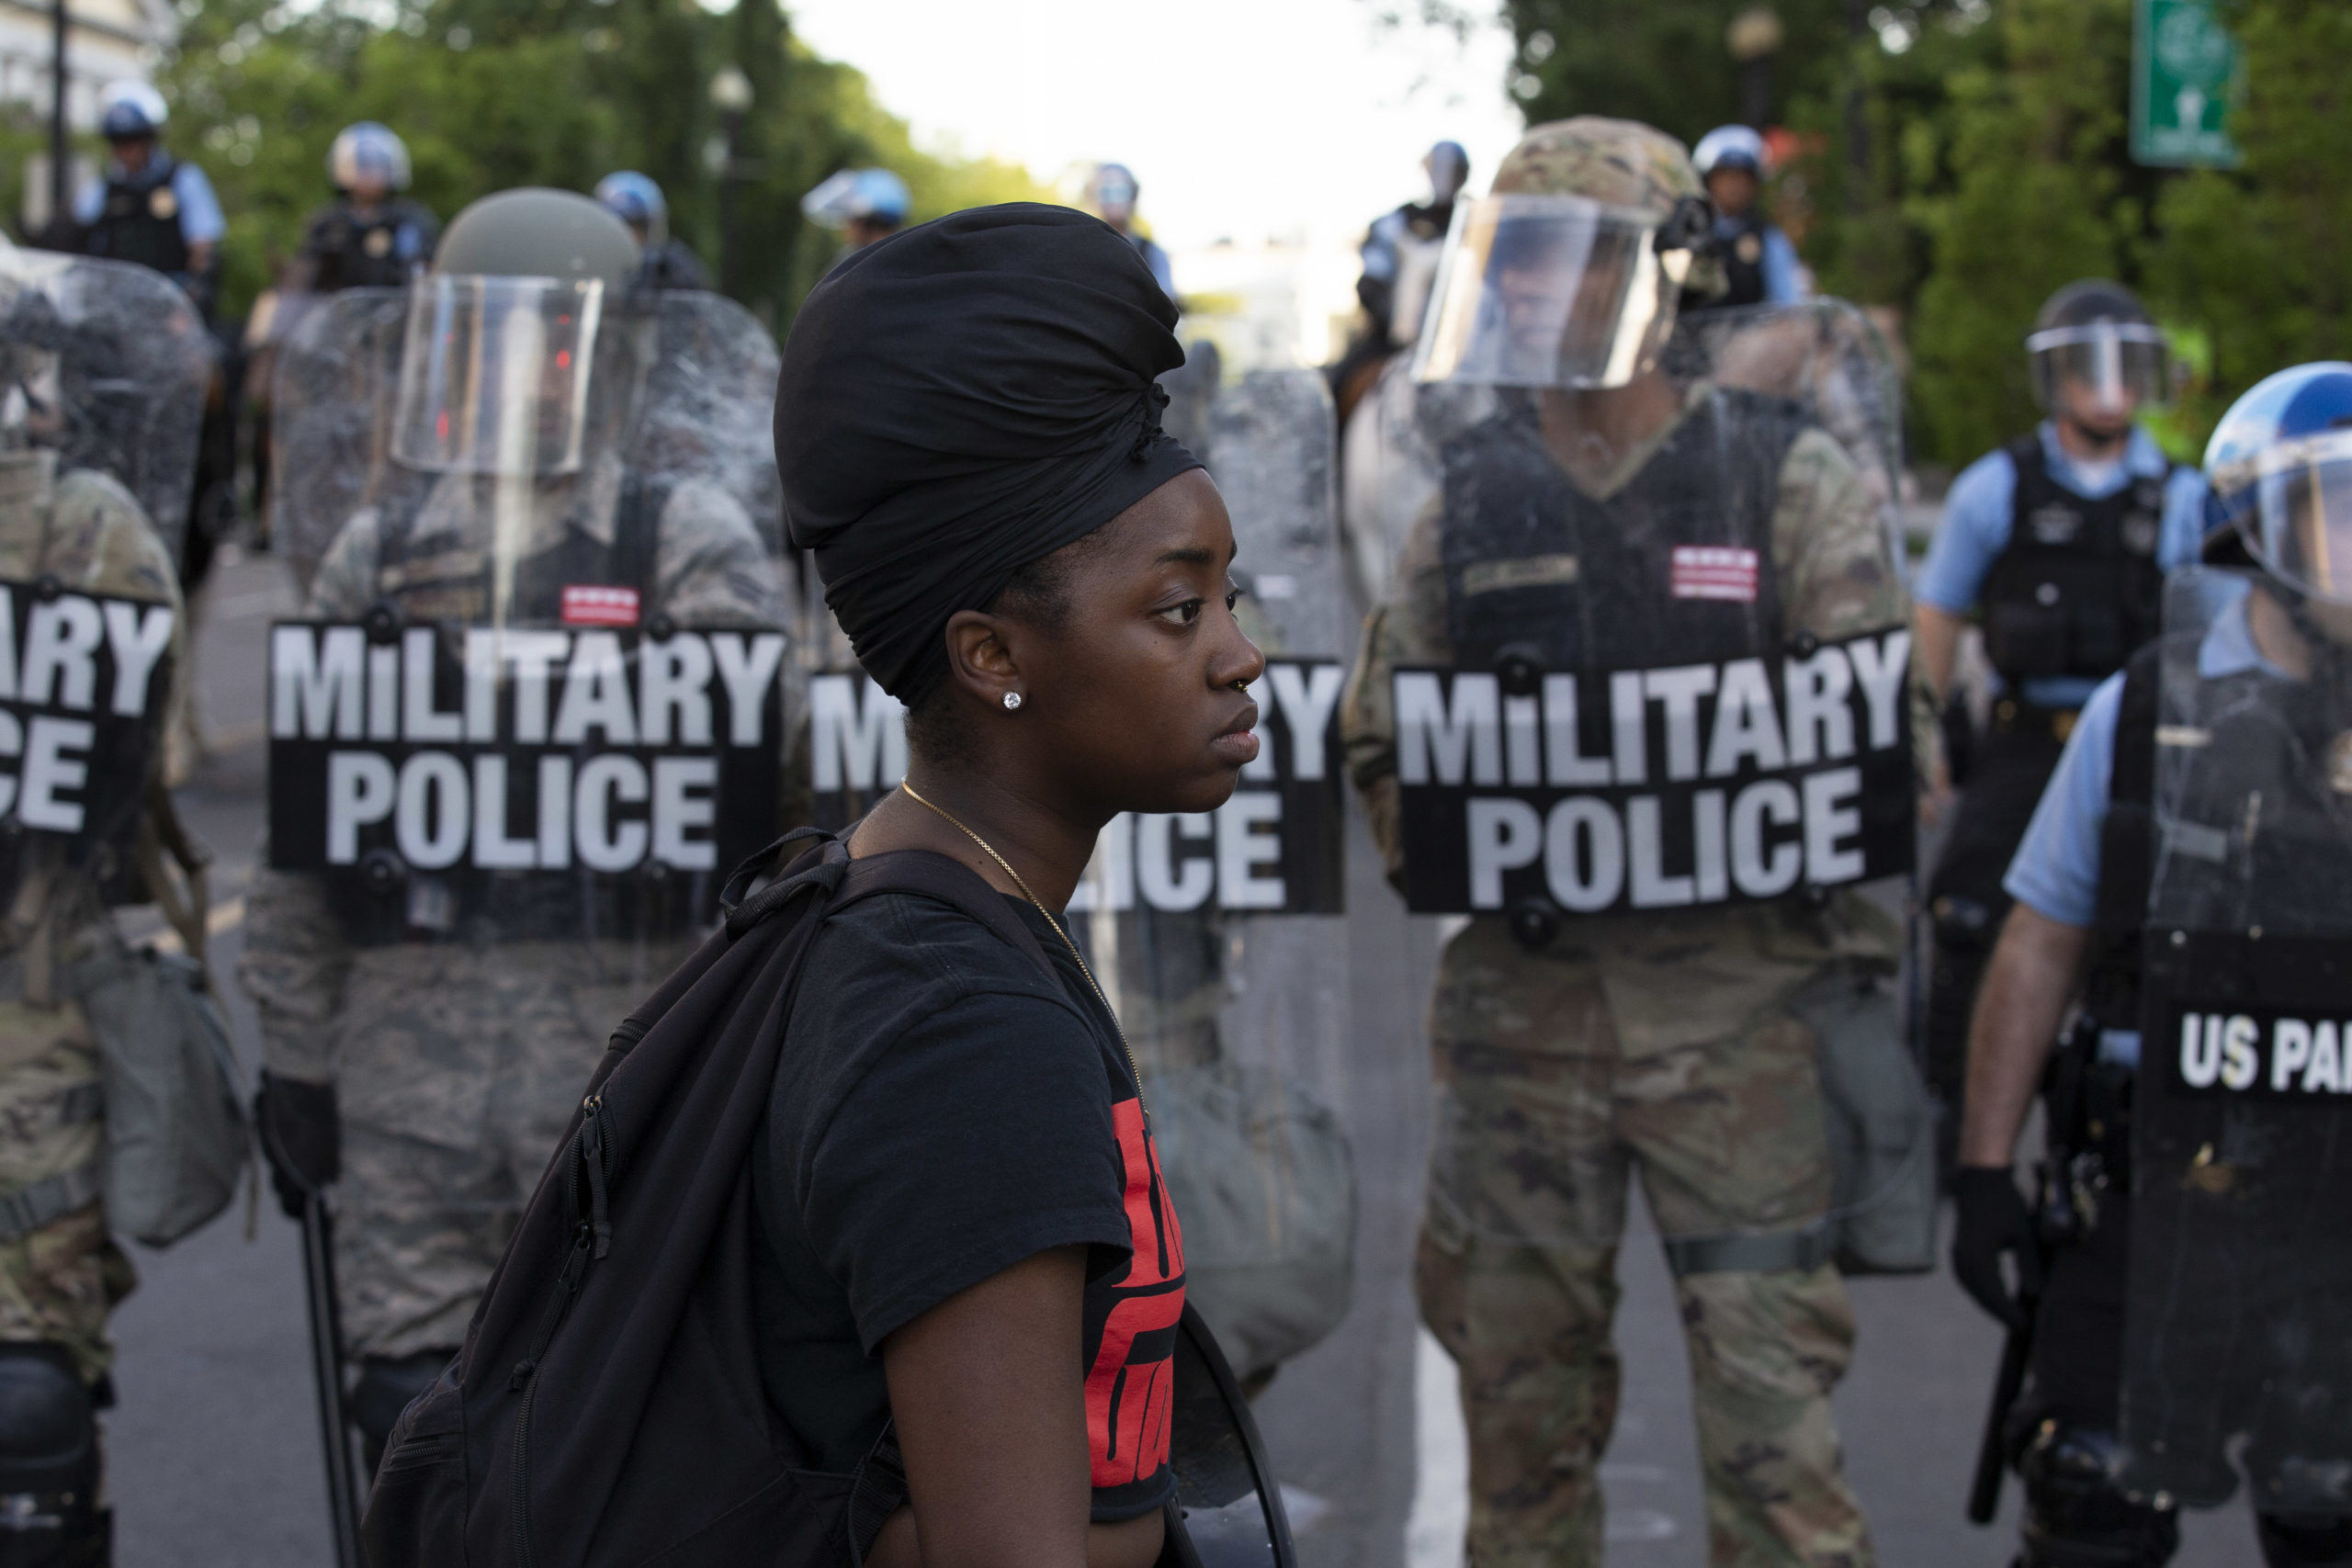 Military police form a riot line in coordination outside the White House on June 1, 2020. (Photo: Jose Luis Magana, Getty Images)